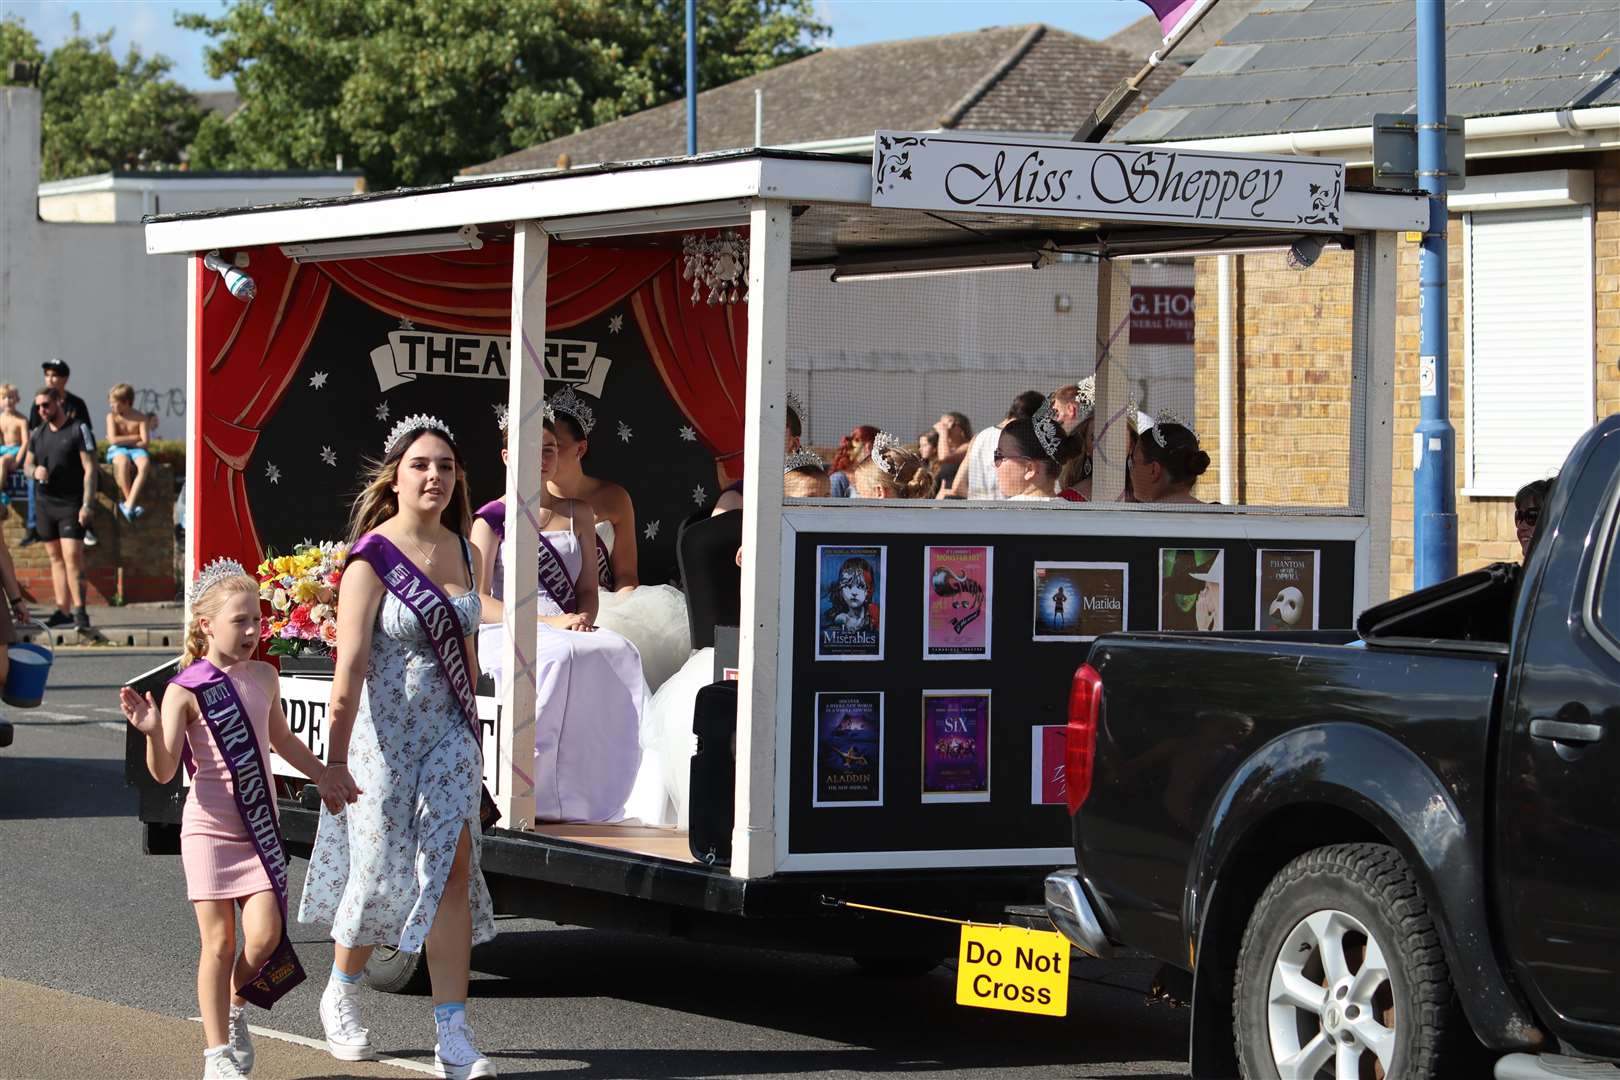 The Miss Sheppey and her court at the Sheppey summer carnival in Sheerness